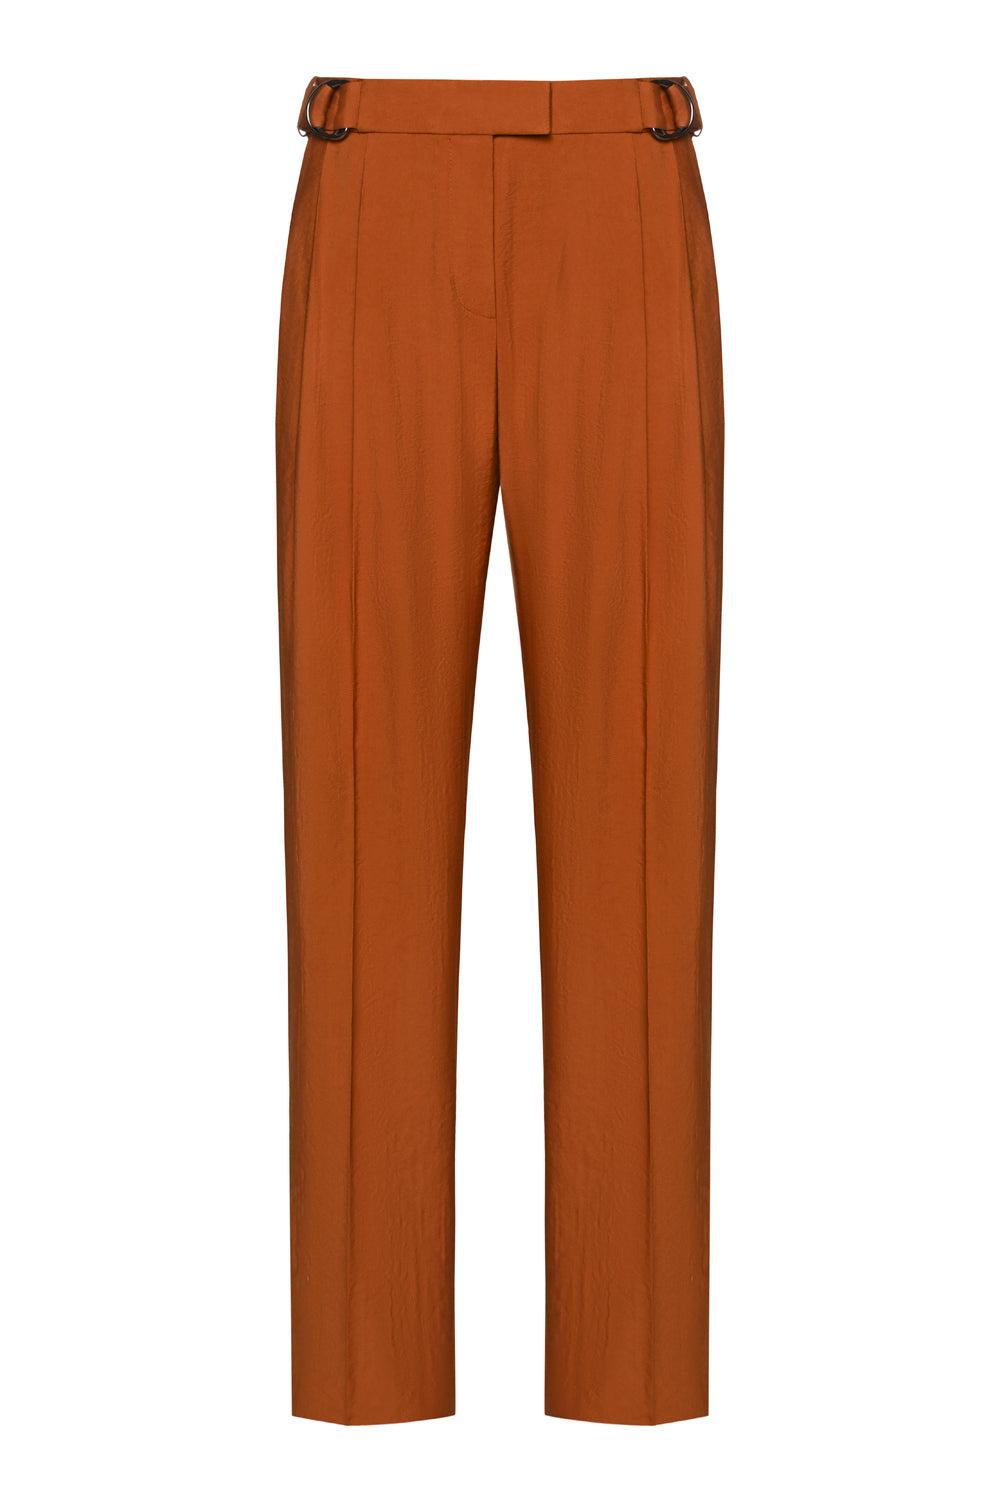 Brown Flared Pants